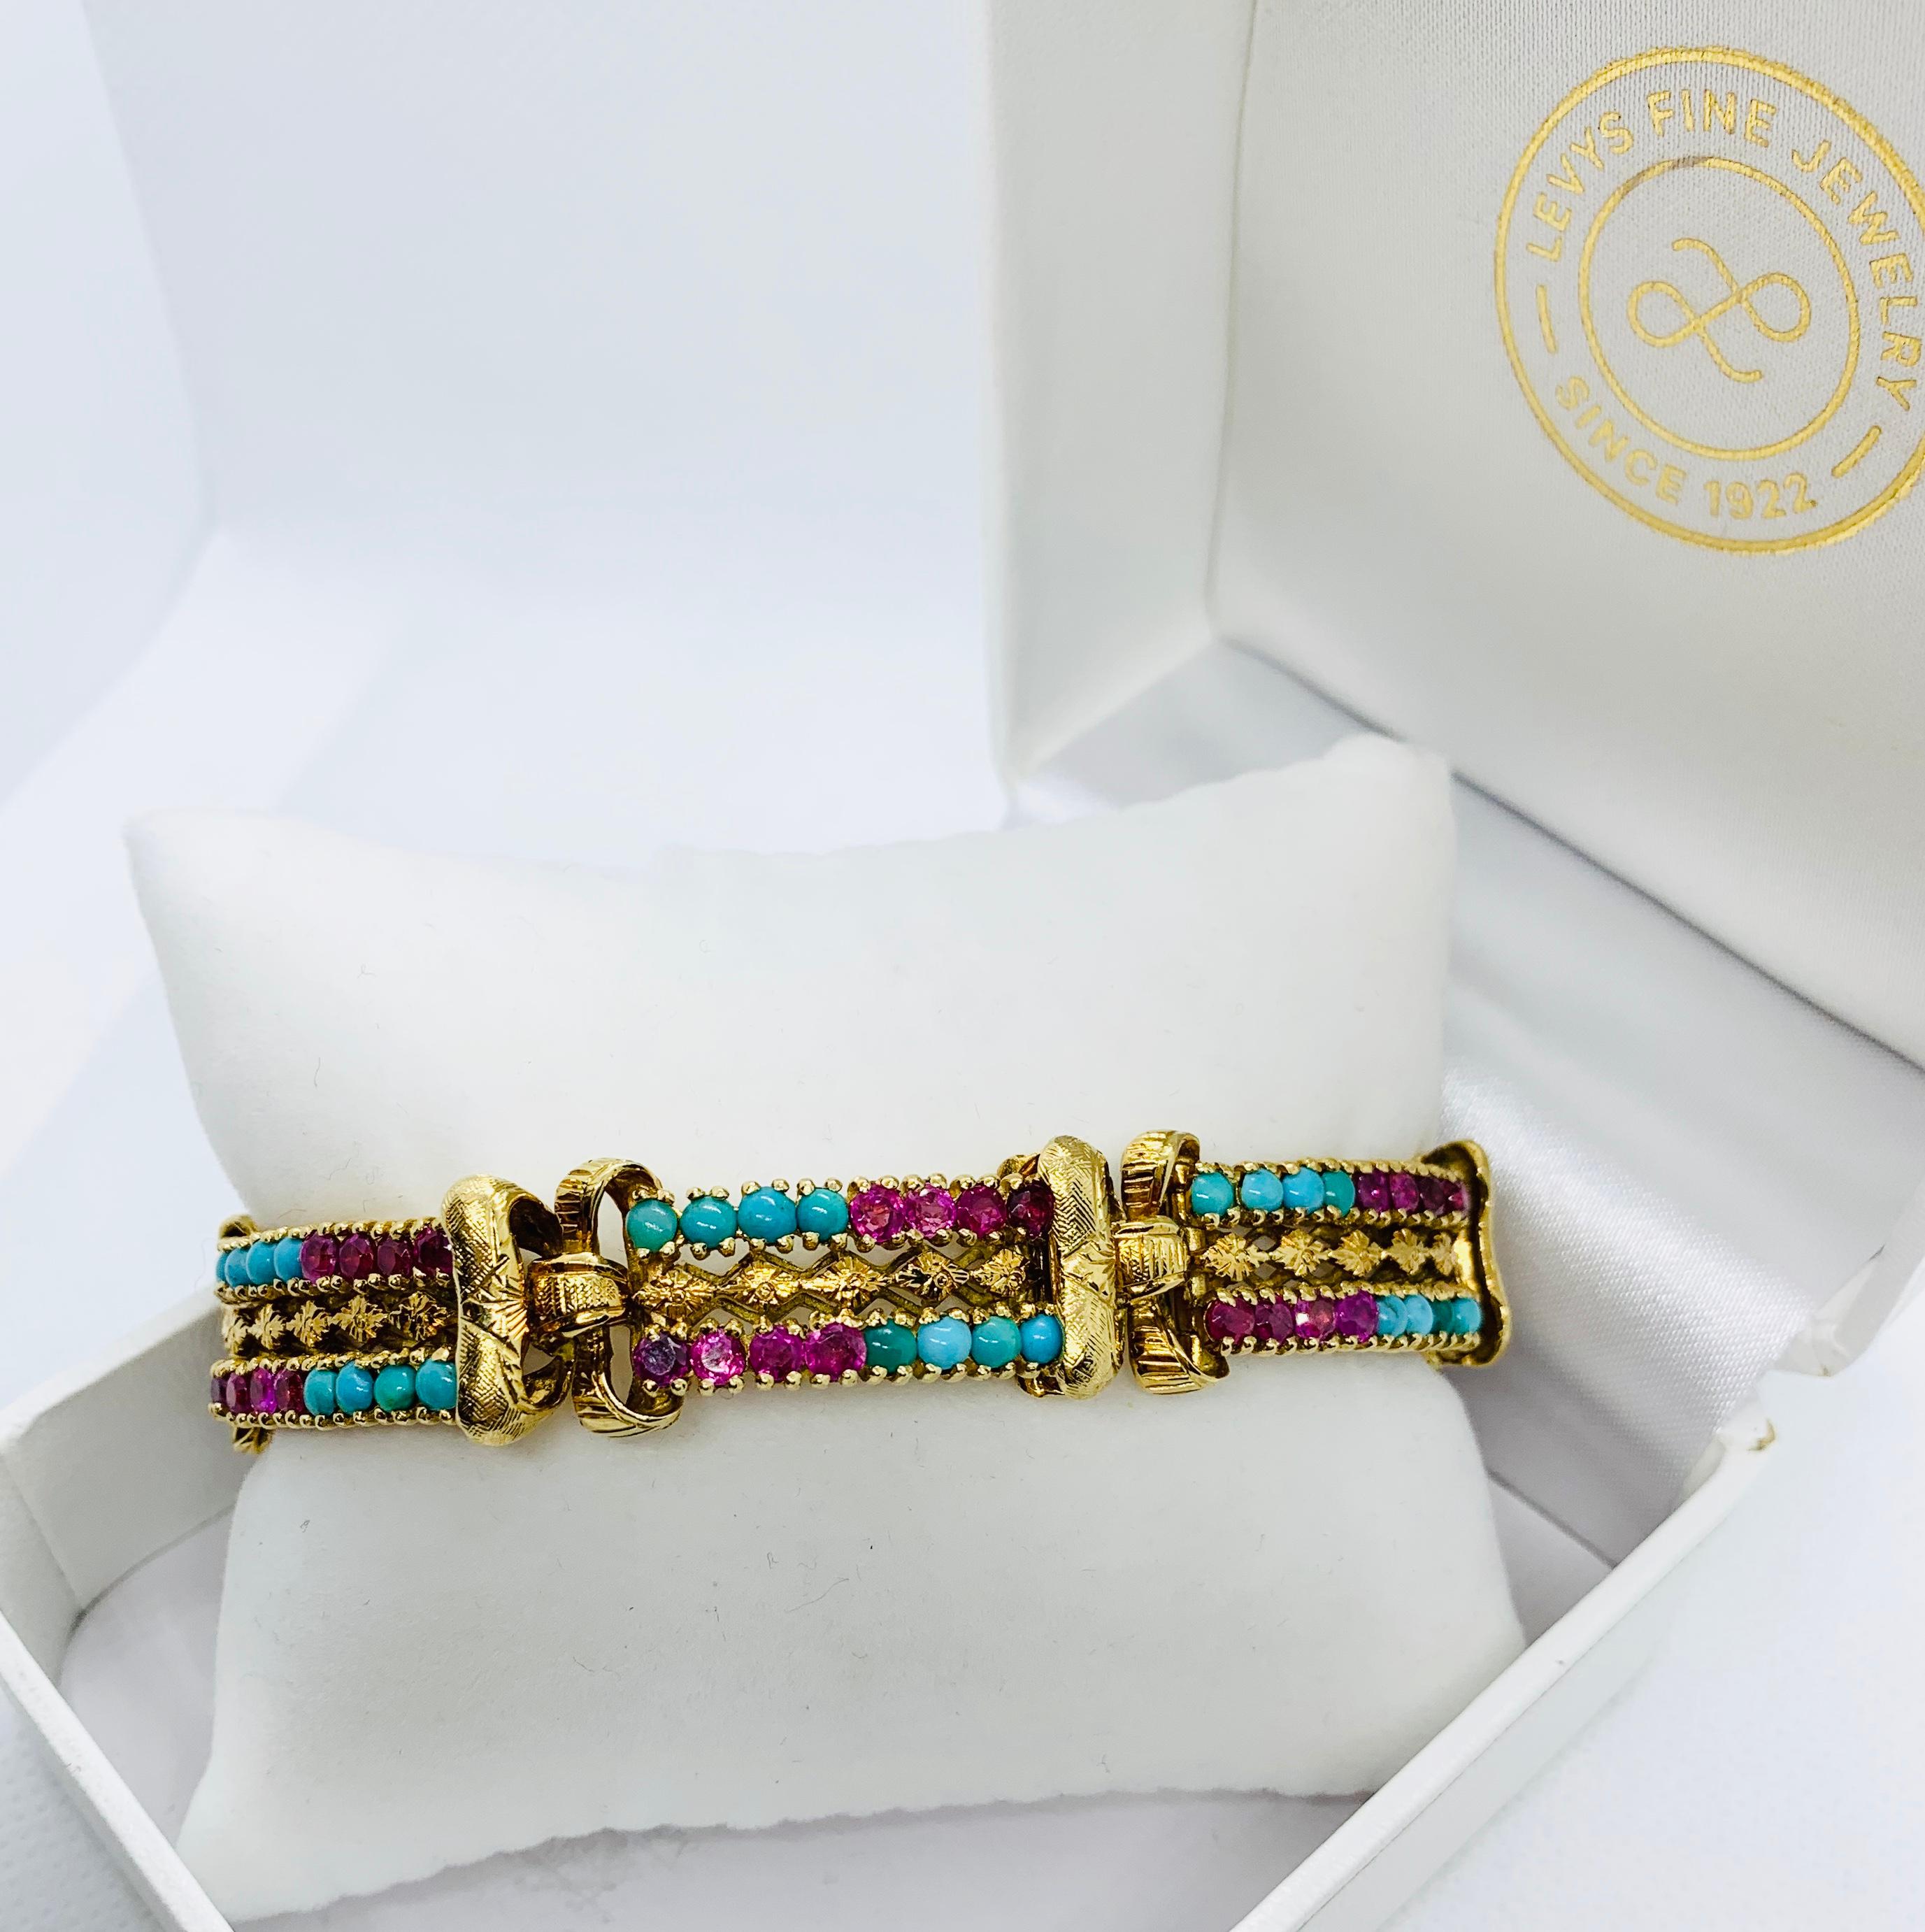 Absolutely Gorgeous Victorian Bracelet! Made in 18k yellow Gold that has been beautifully engraved. Each section has alternating rows of cabochon cut 3 mm turquoise ( total 48) and 3.2 mm rubies (Total 48). The rubies weigh an estimated 8 carats.